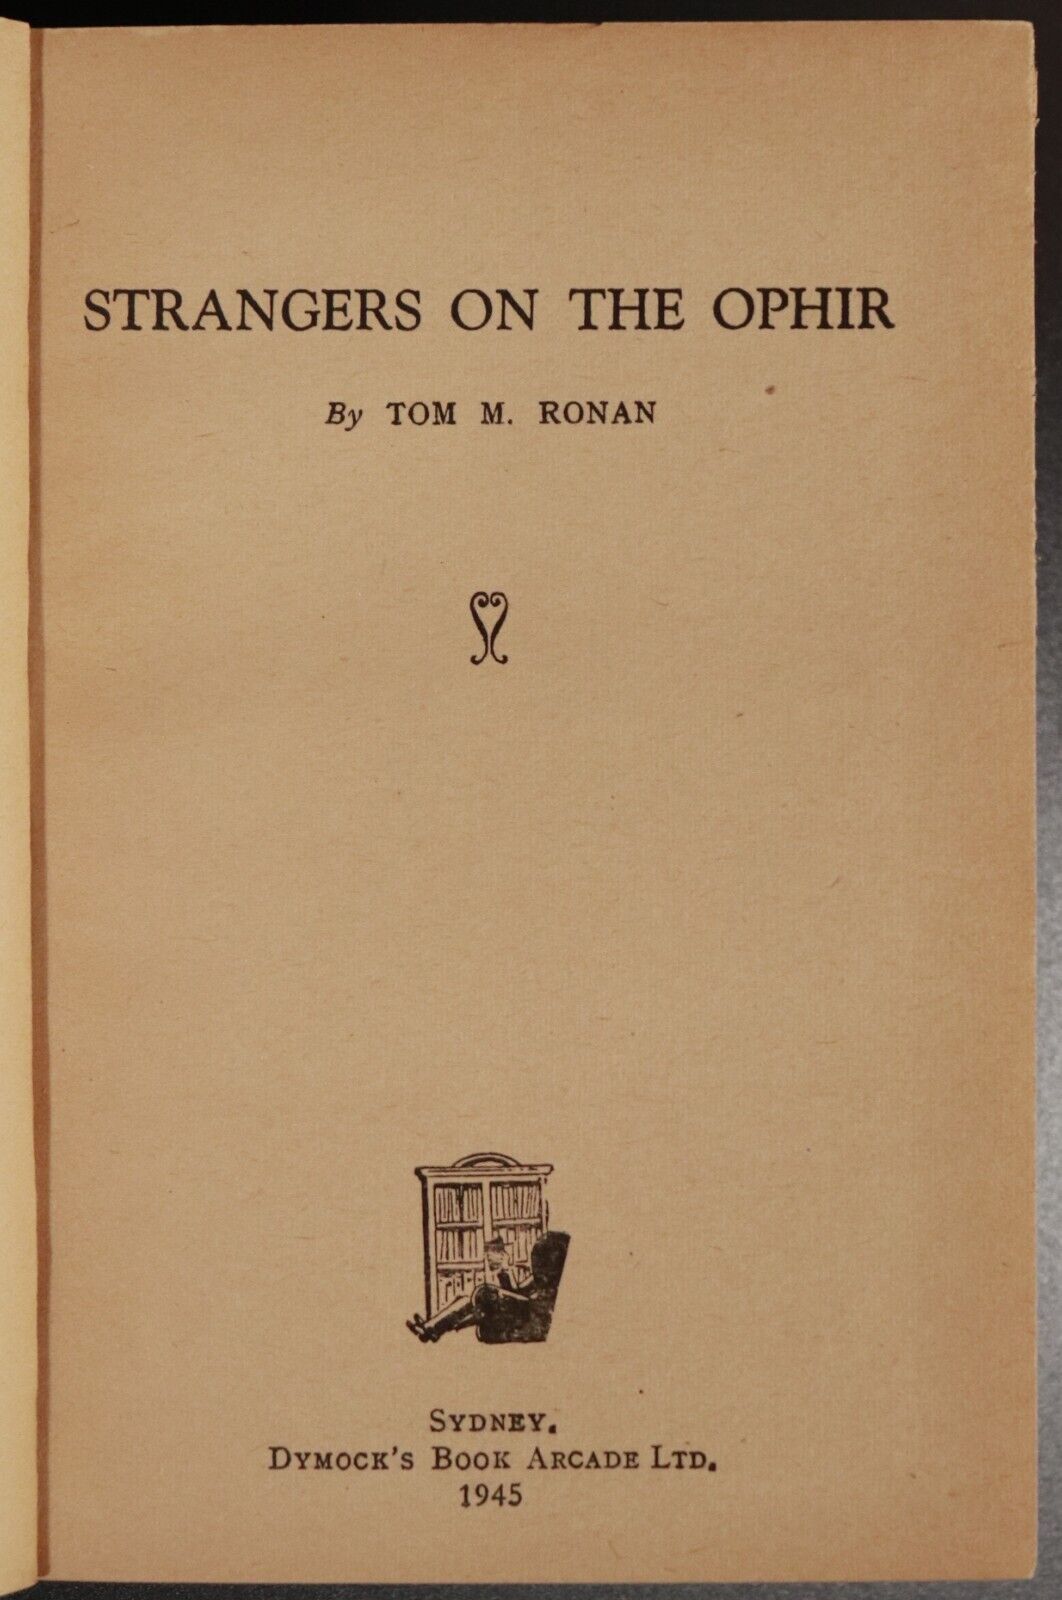 1945 Strangers On The Ophir by Tom Ronan 1st Edition Australian Fiction Book